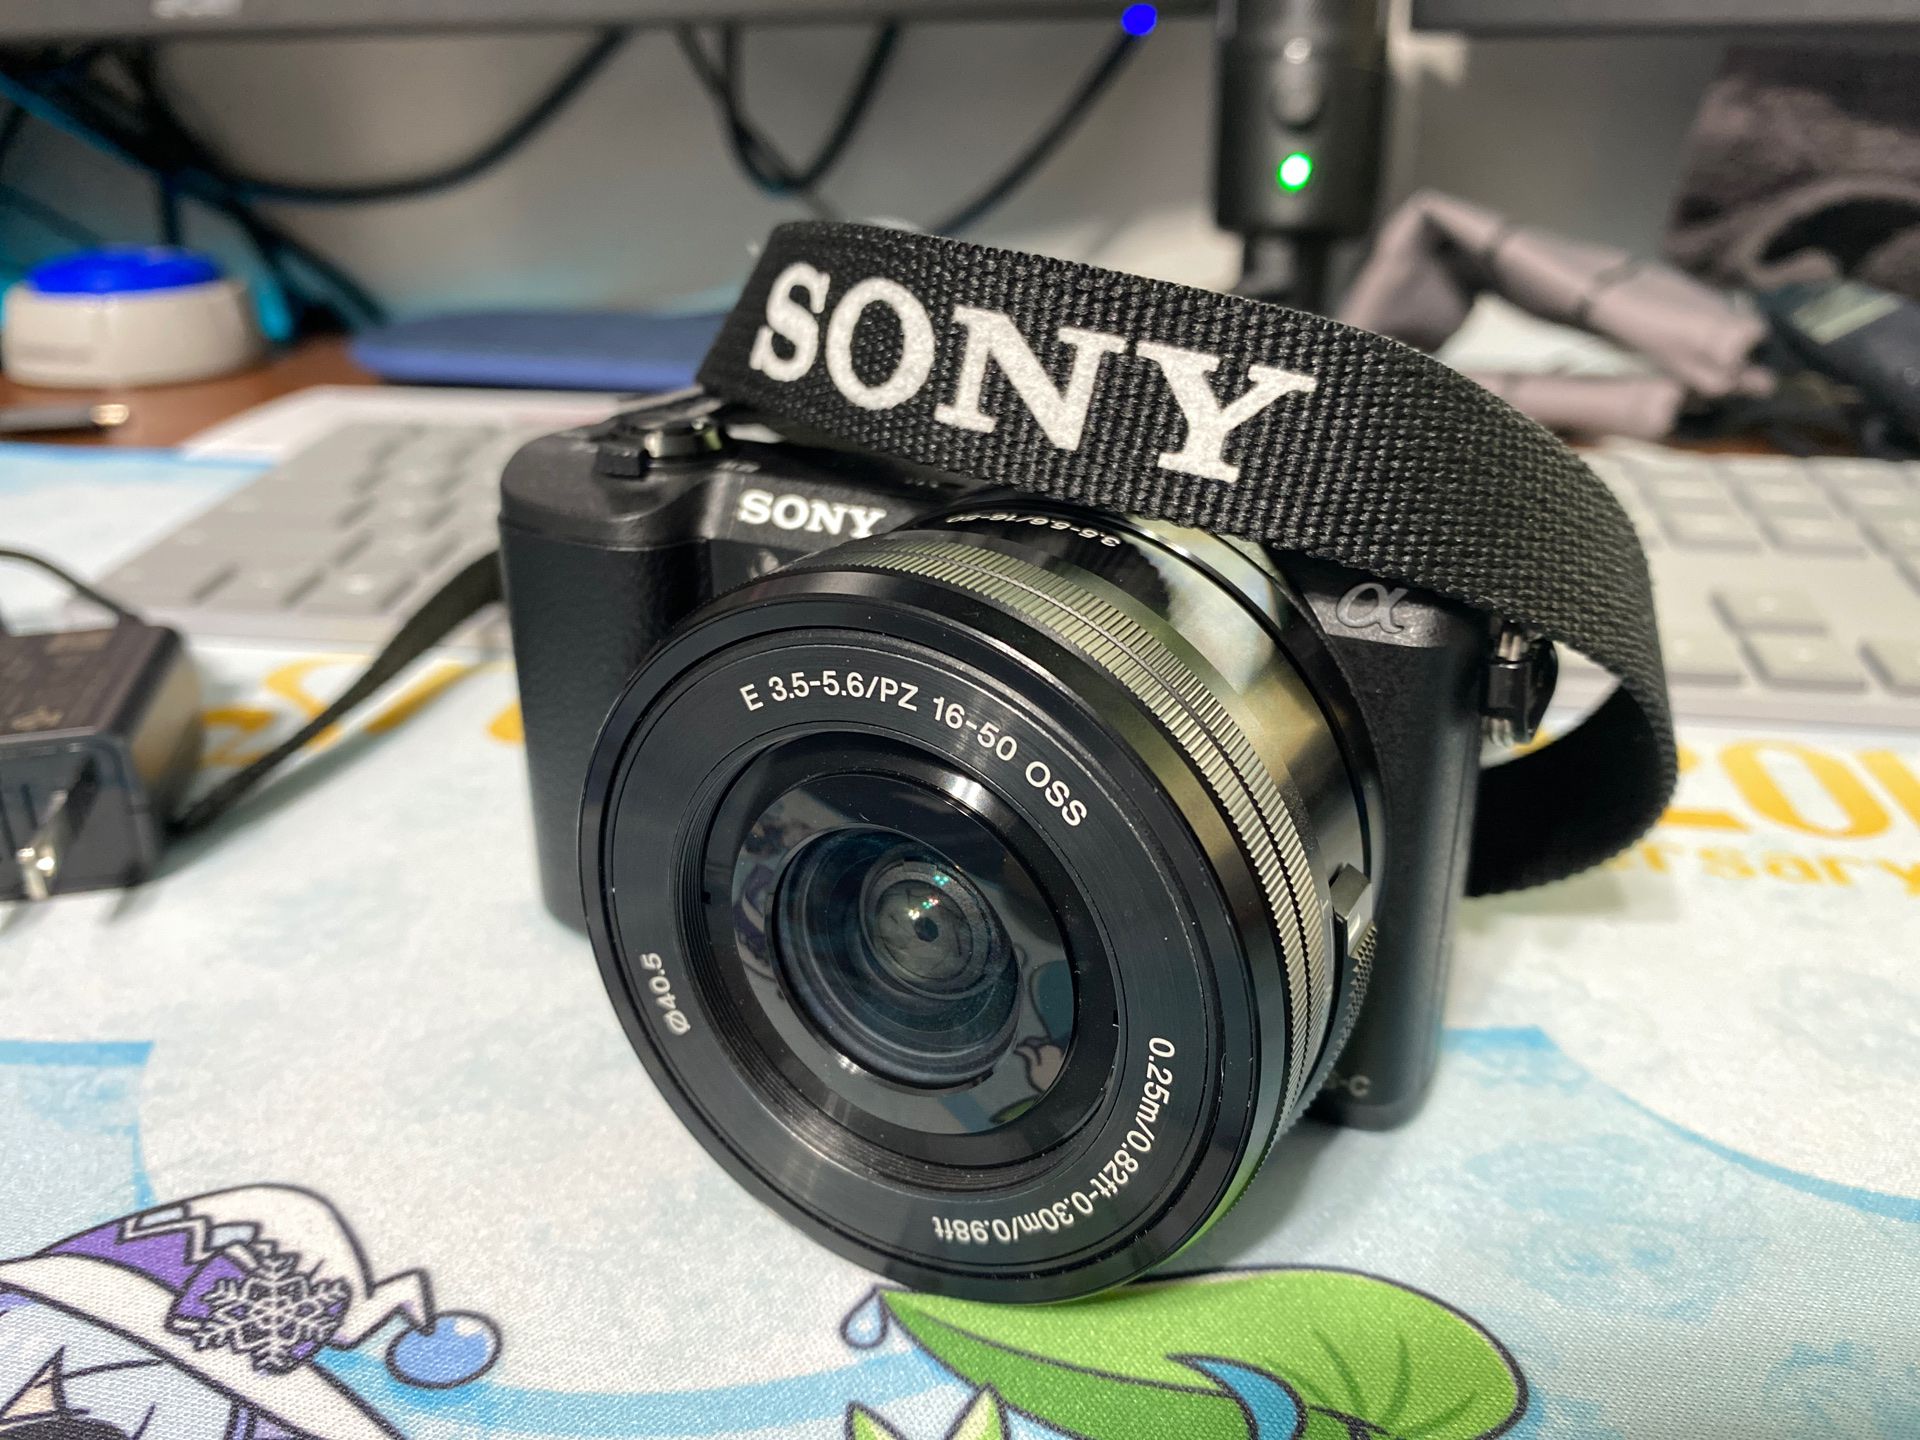 Sony a5100 w/16-55mm lens and 64GB SD Card